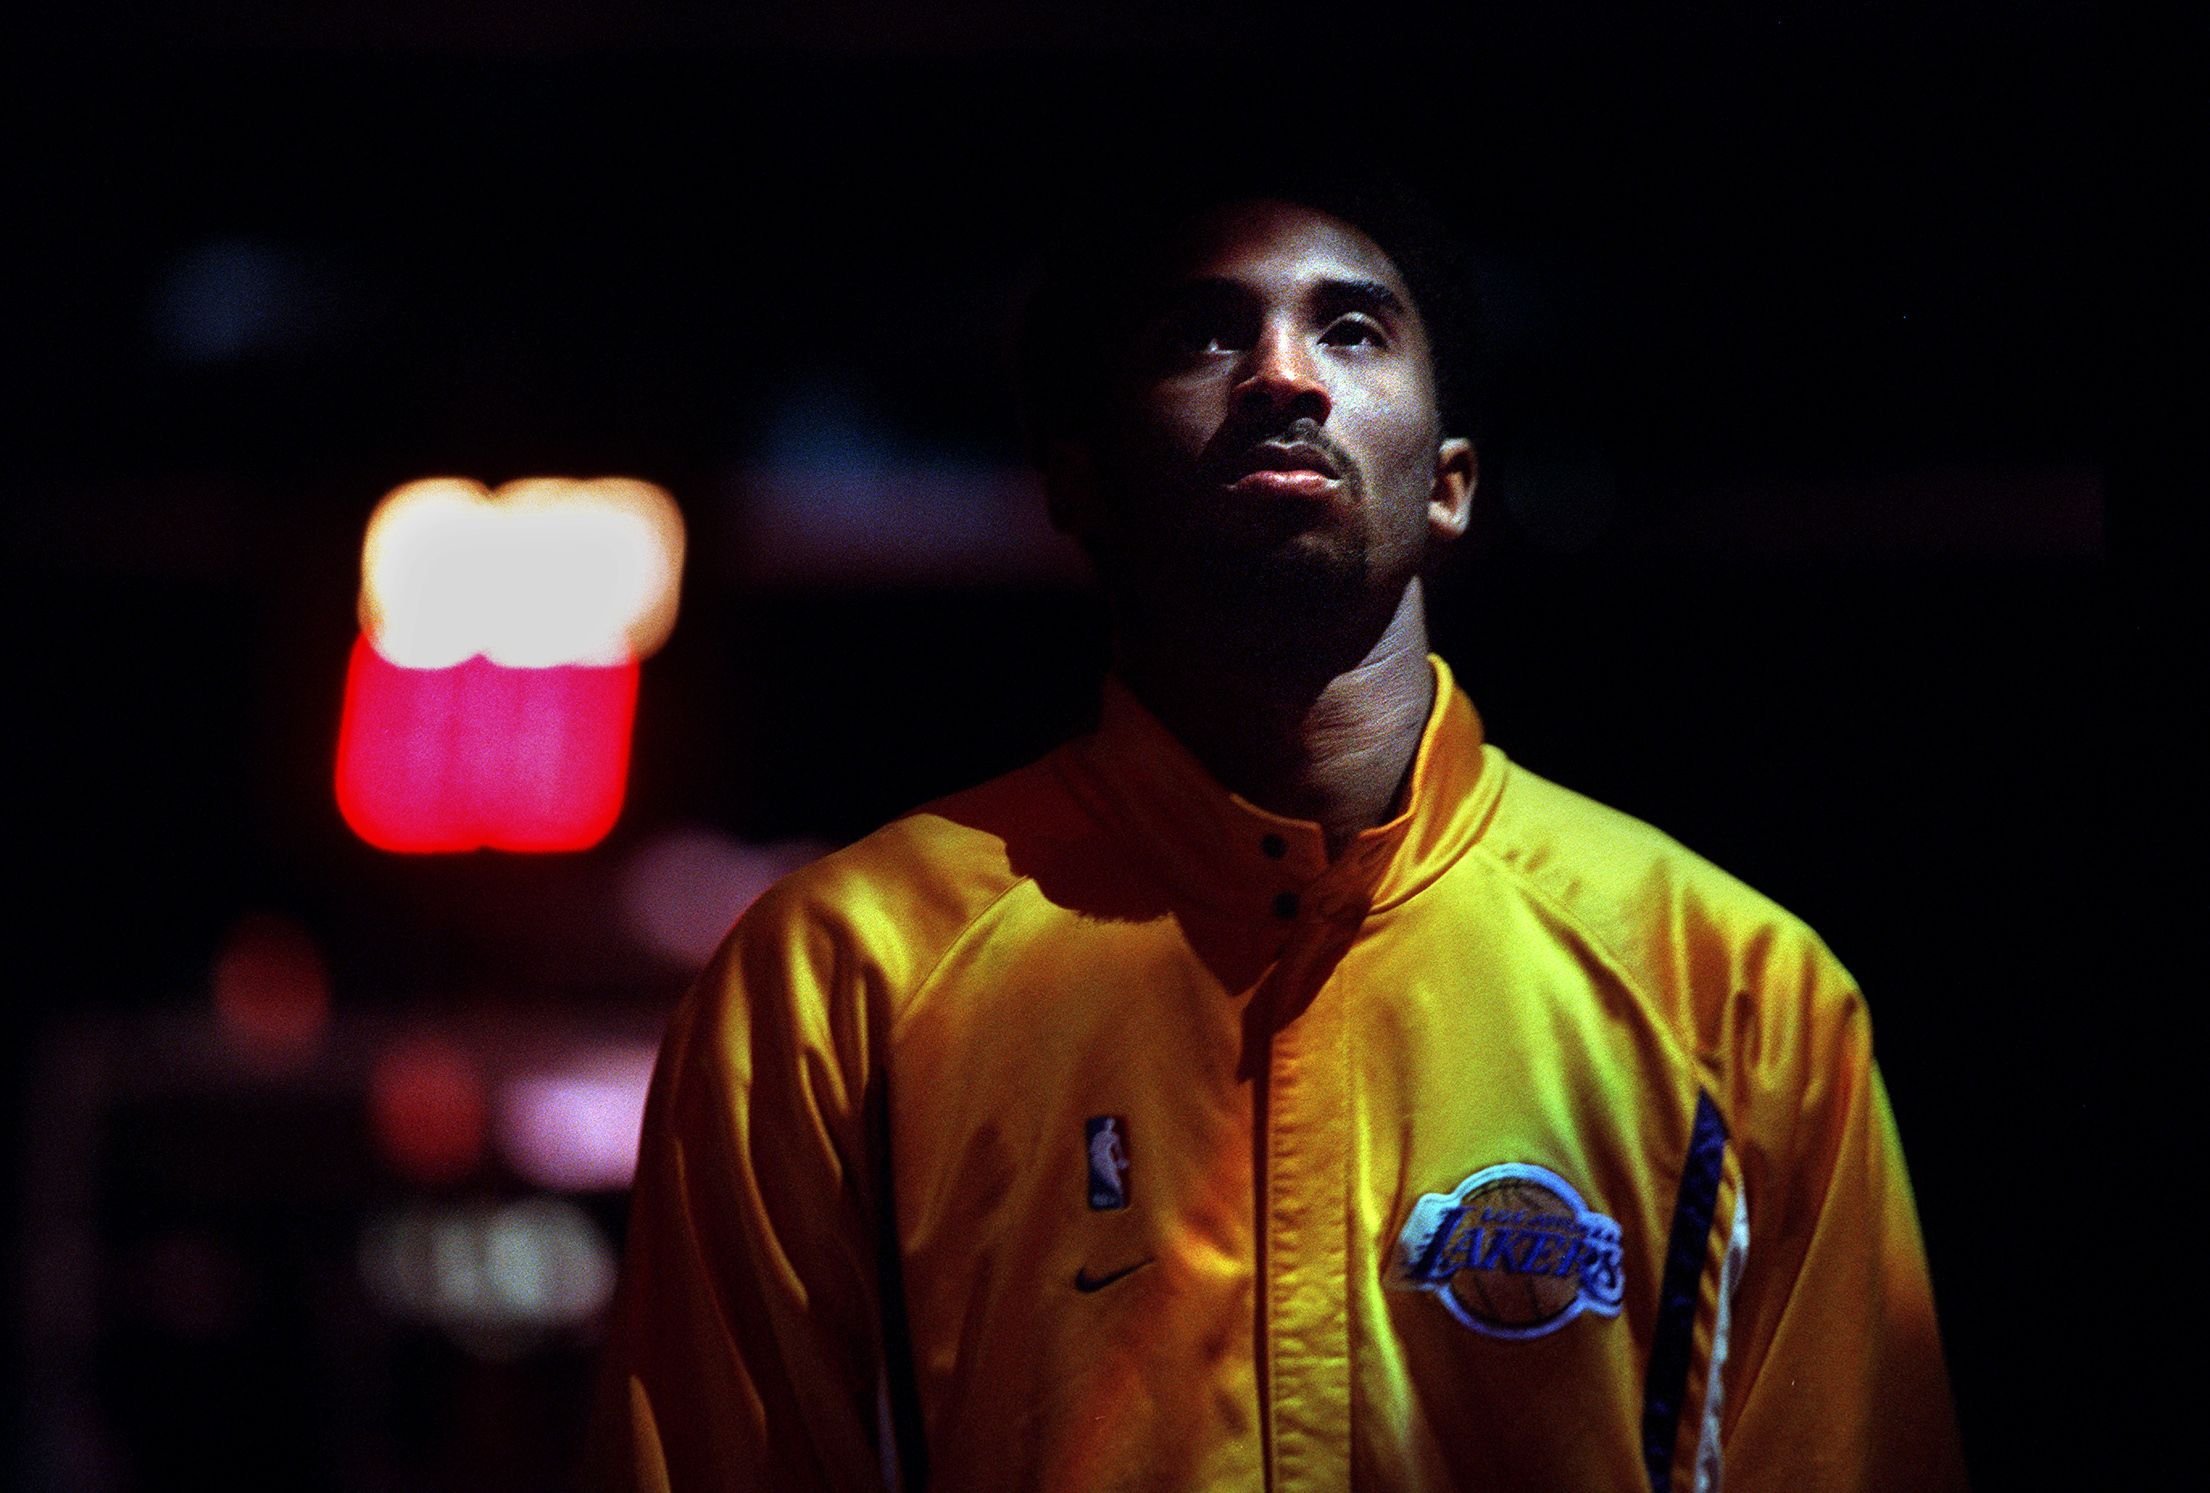 Kobe Bryant at an NBA pre-game ceremony | Source: Getty Images/GlobalImagesUkraine